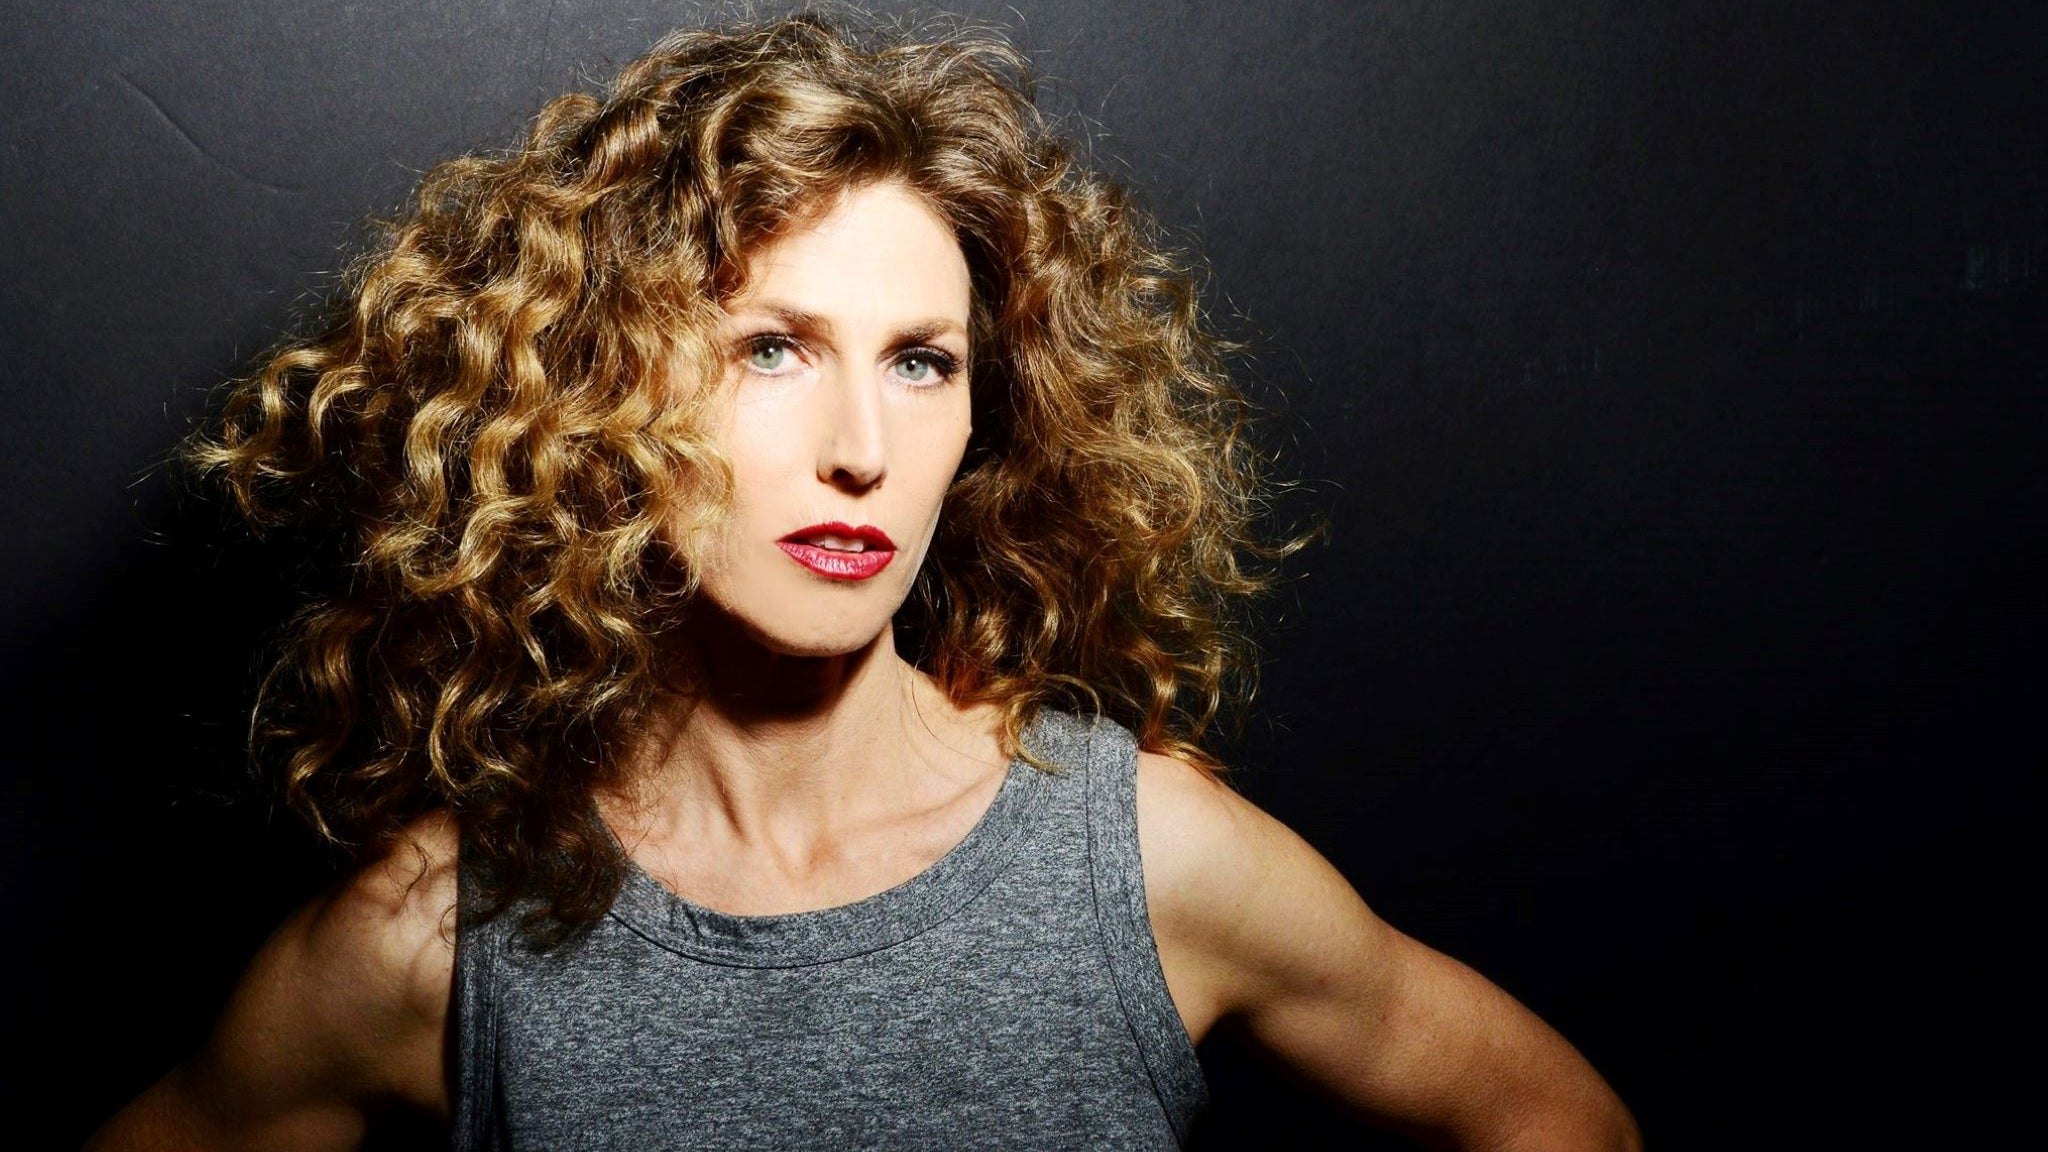 Sophie B. Hawkins in Portsmouth promo photo for Inner Circle presale offer code